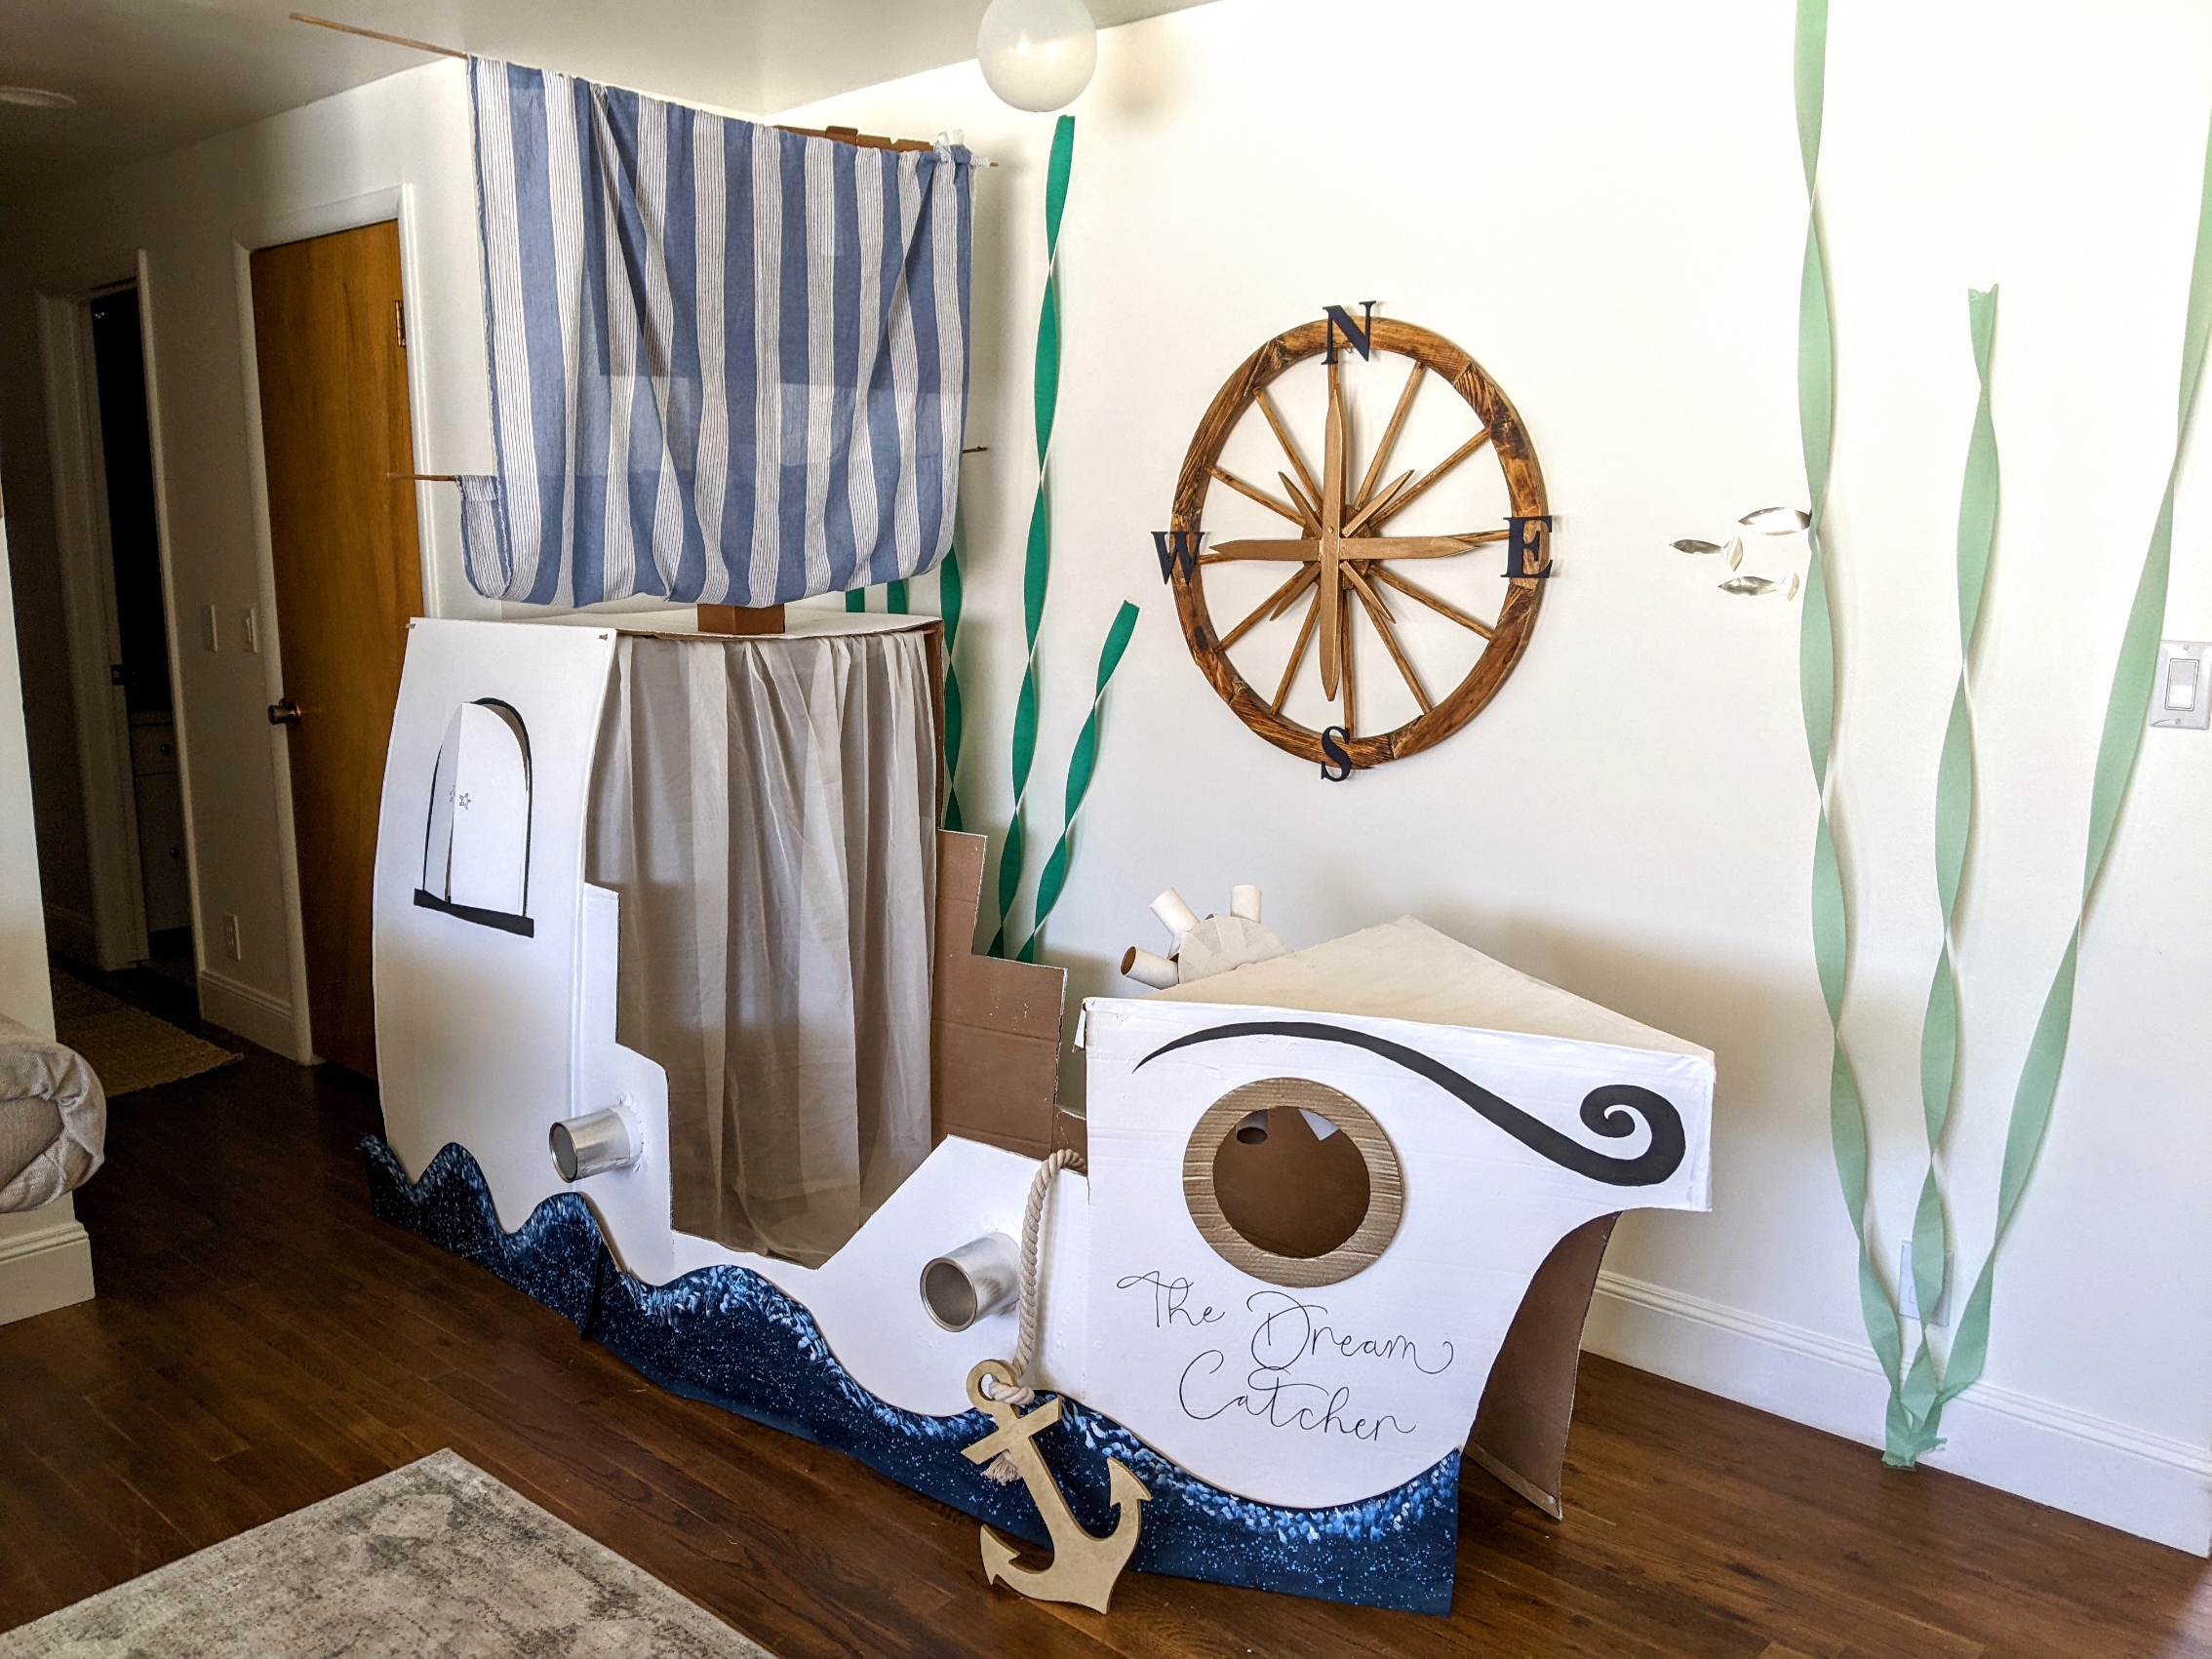 Mermaid & Pirate Birthday Party • The Nook on 32